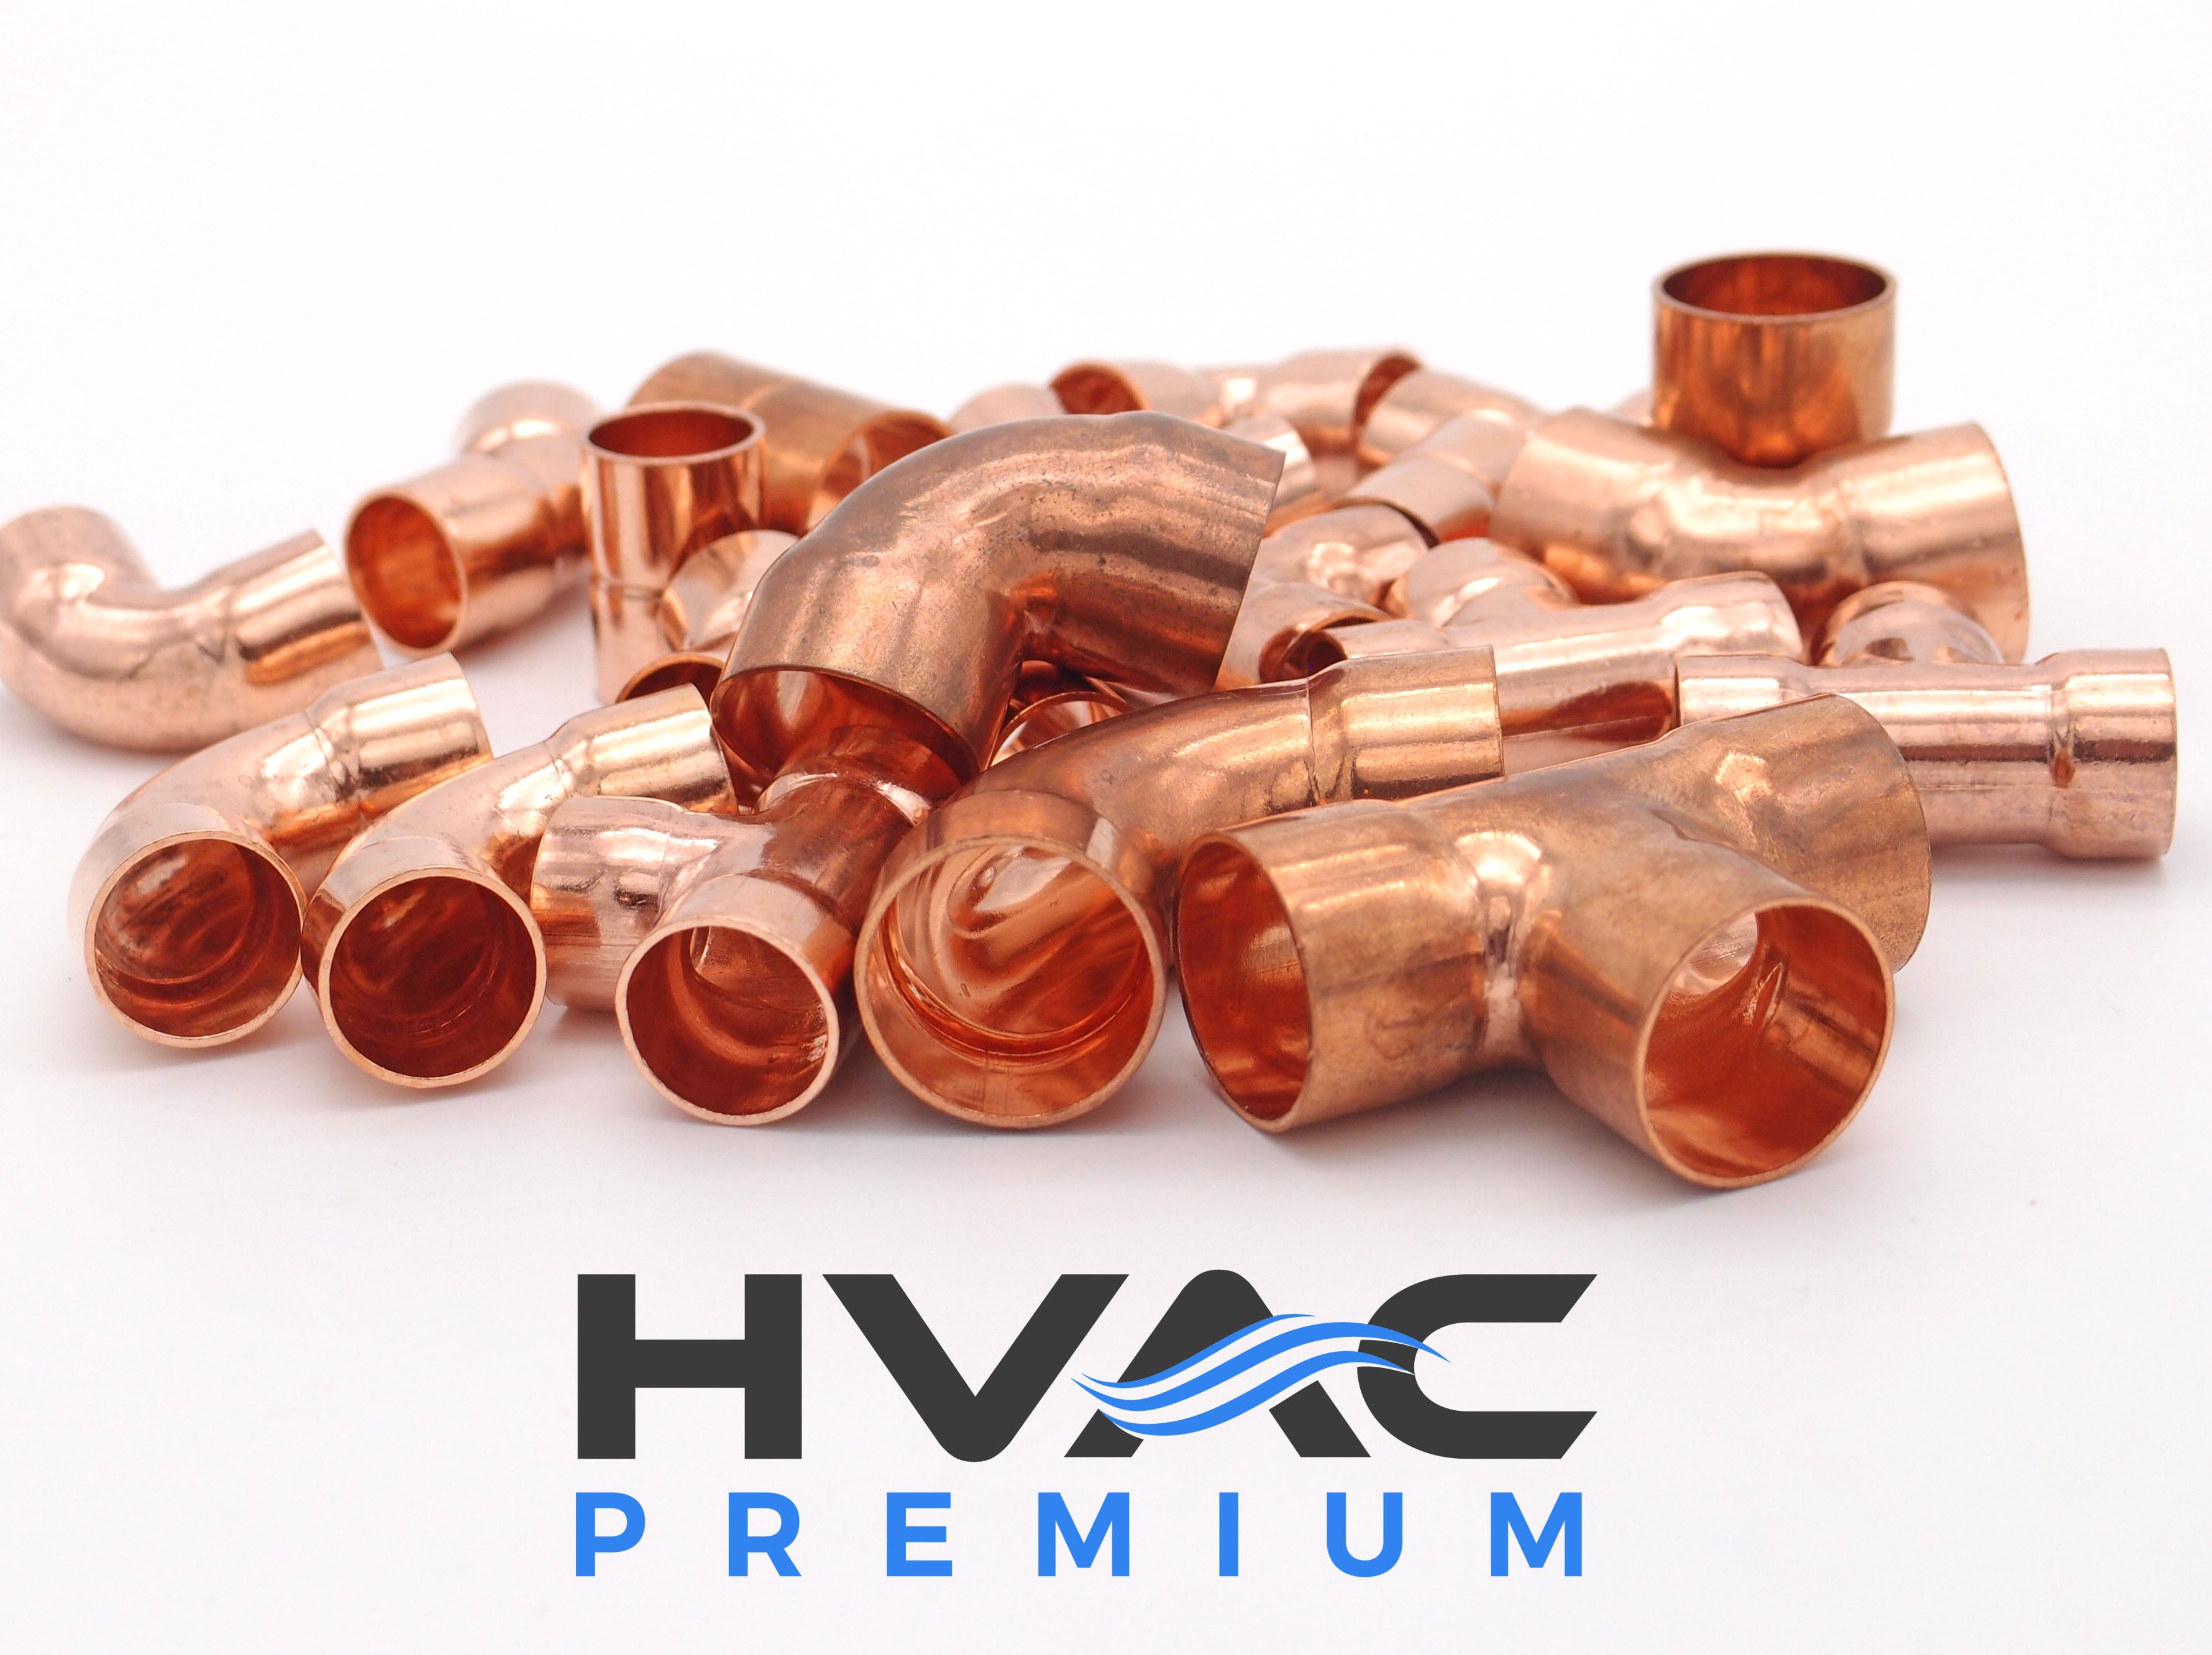 Copper Fitting 3/4 Inch (HVAC Outer Dimension) 5/8 Inch (Plumbing Inner Dimension) - Straight Copper Coupling Fittings With Rolled Tube Stop & HVAC – 99.9% Pure Copper - 5 Pack